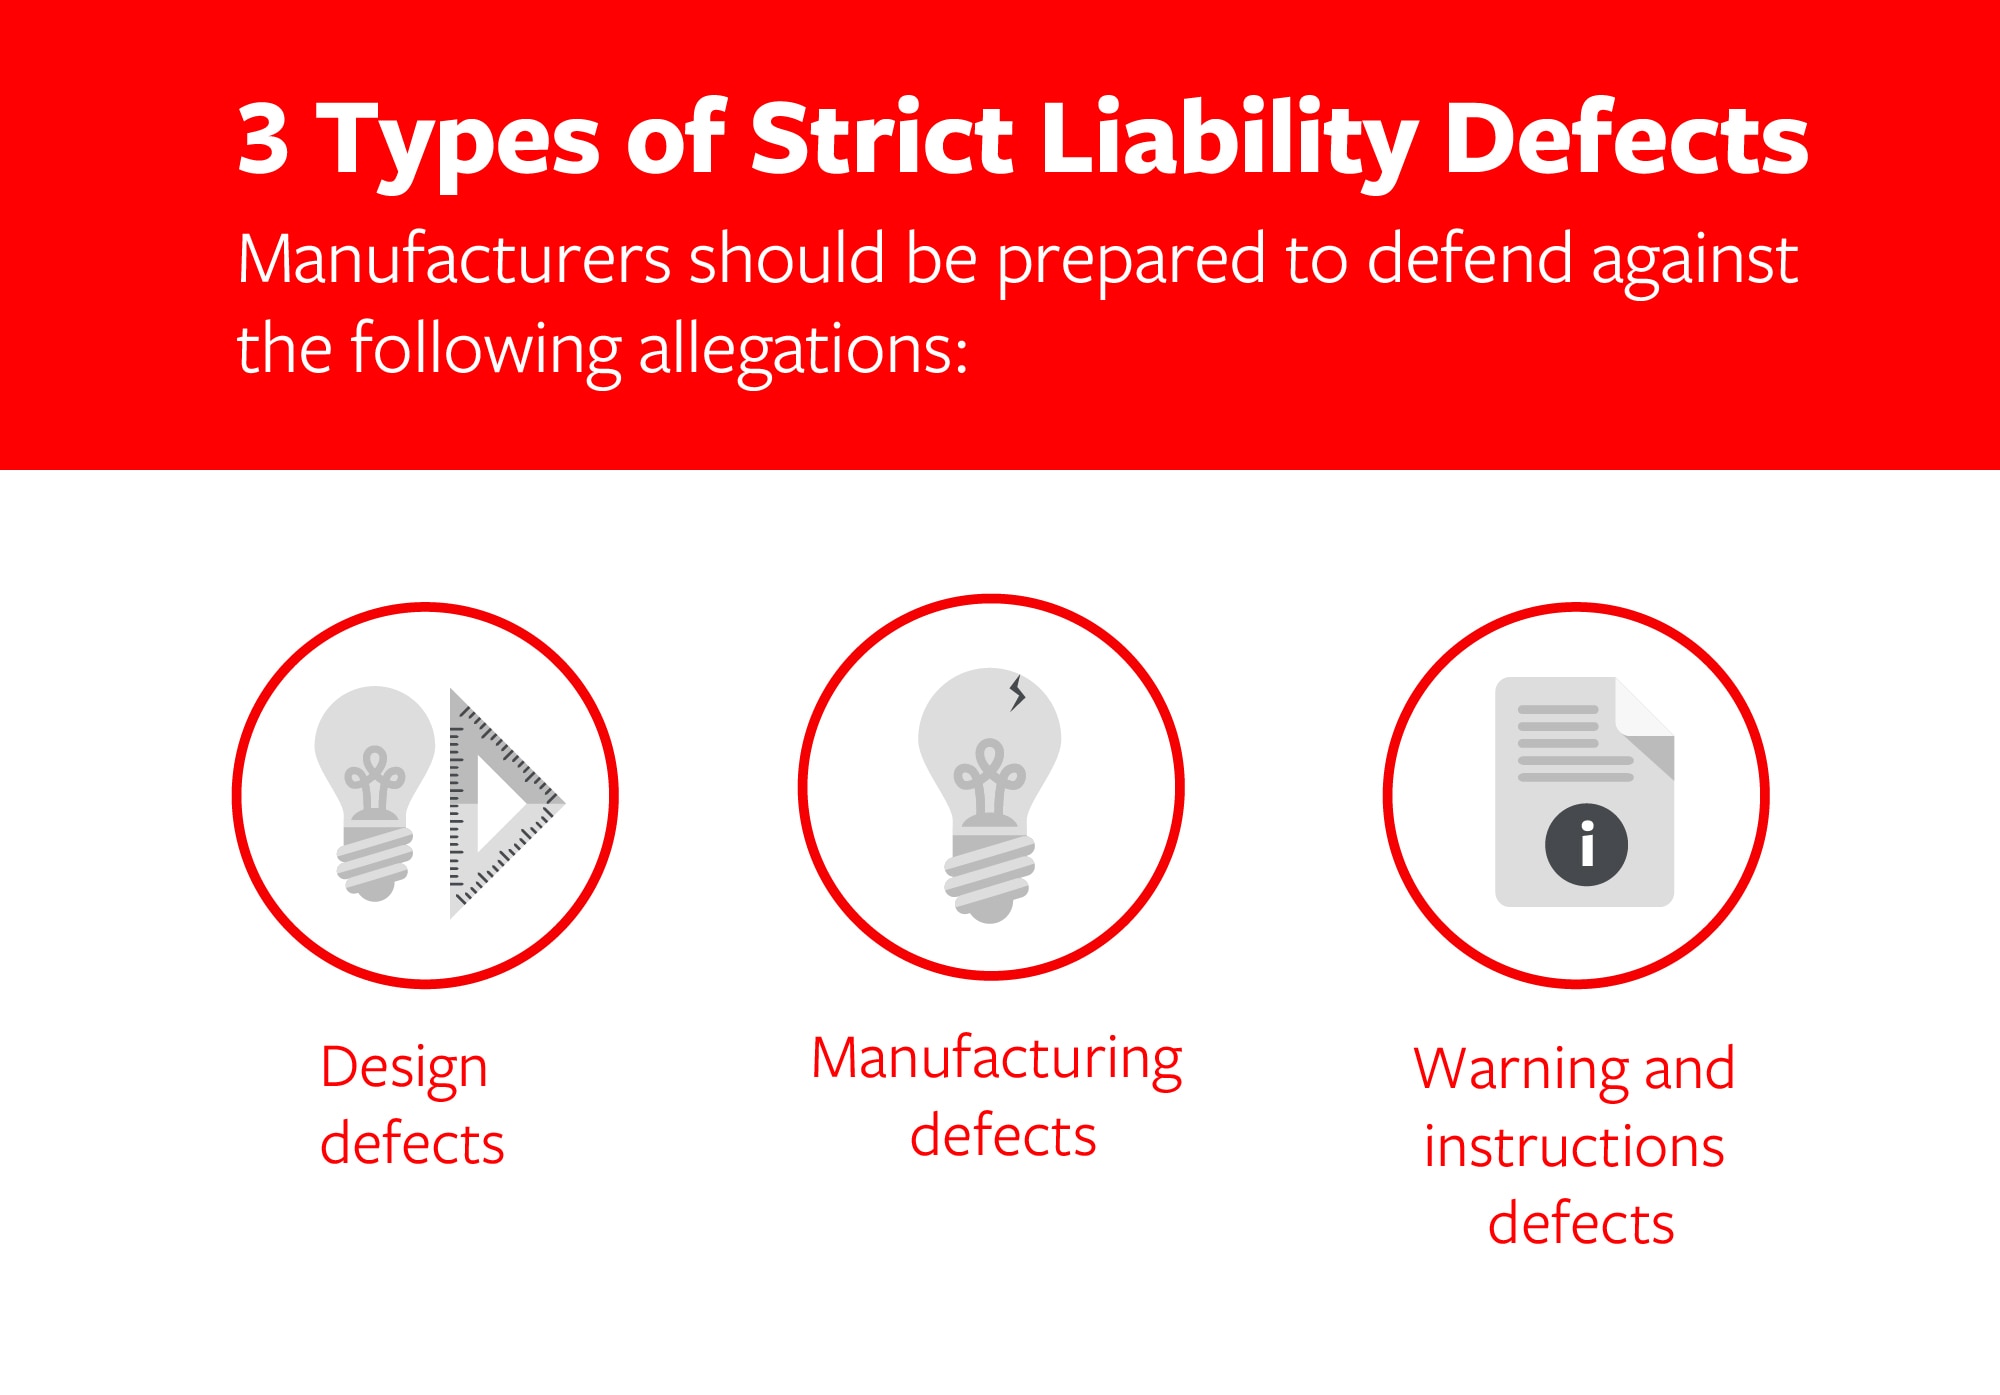 Text, 3 Types of Strict Liability Defects. Manufacturers should be prepared to defend against: Design, Manufacturing, & Warning and instruction defects